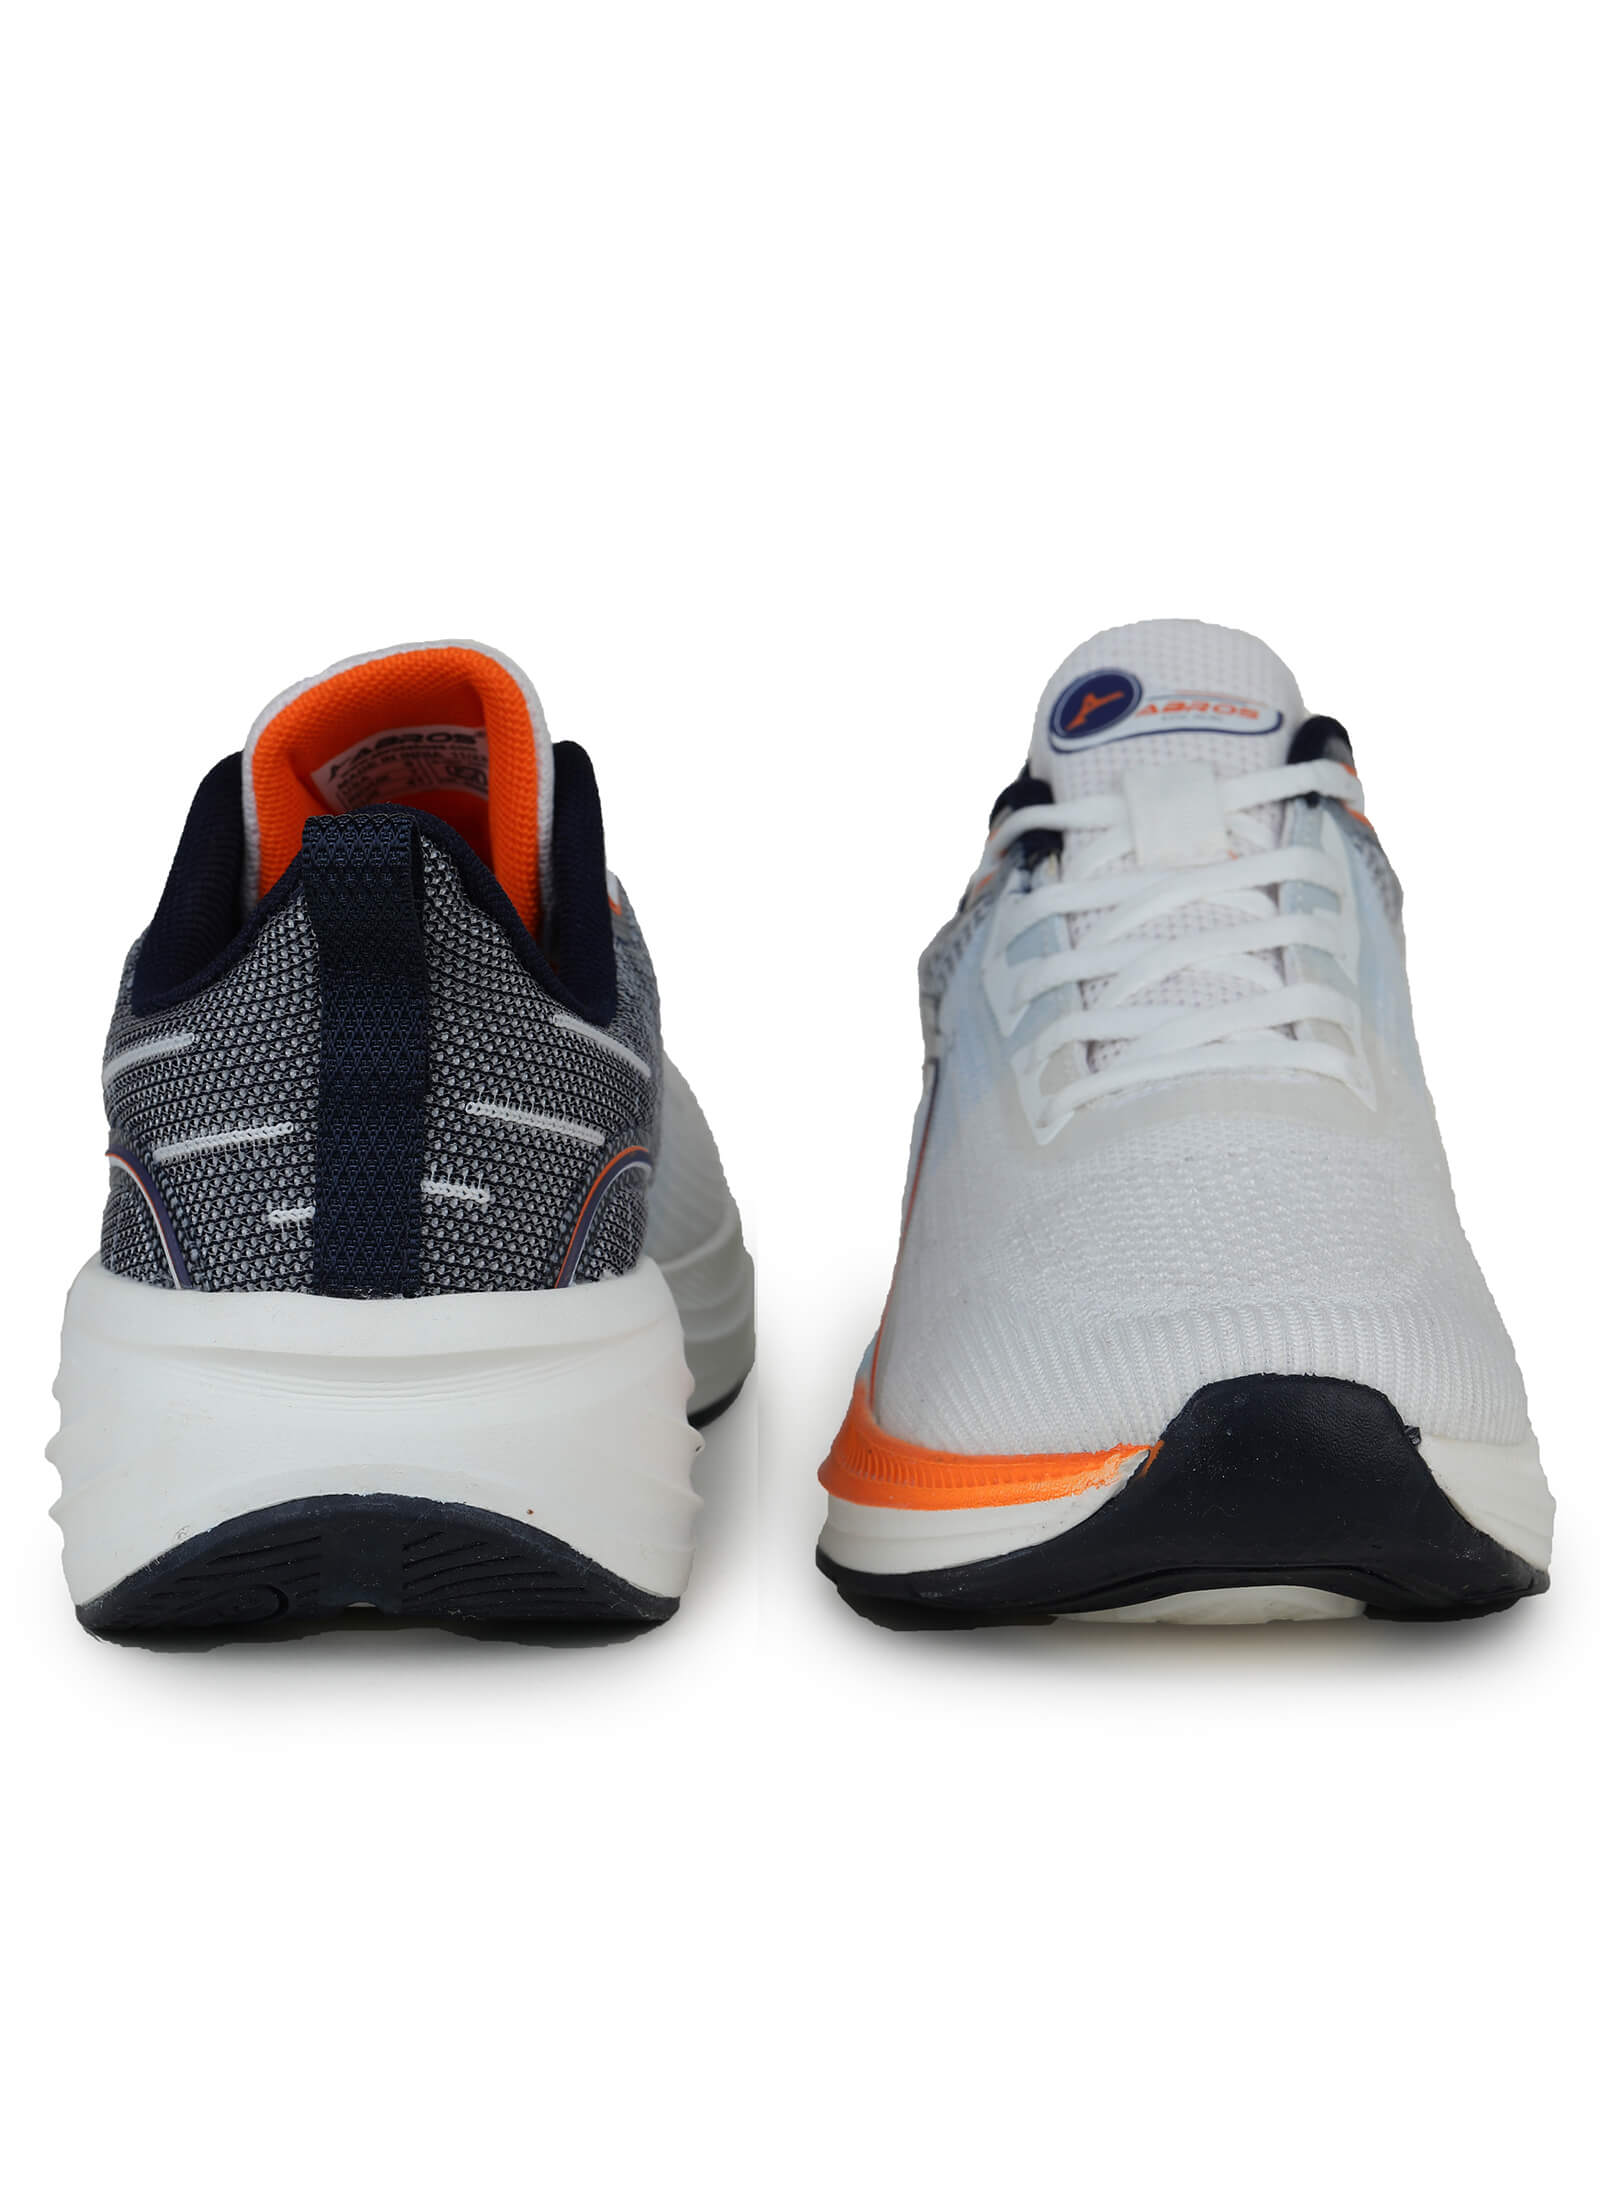 Fort Sports Shoes For Men